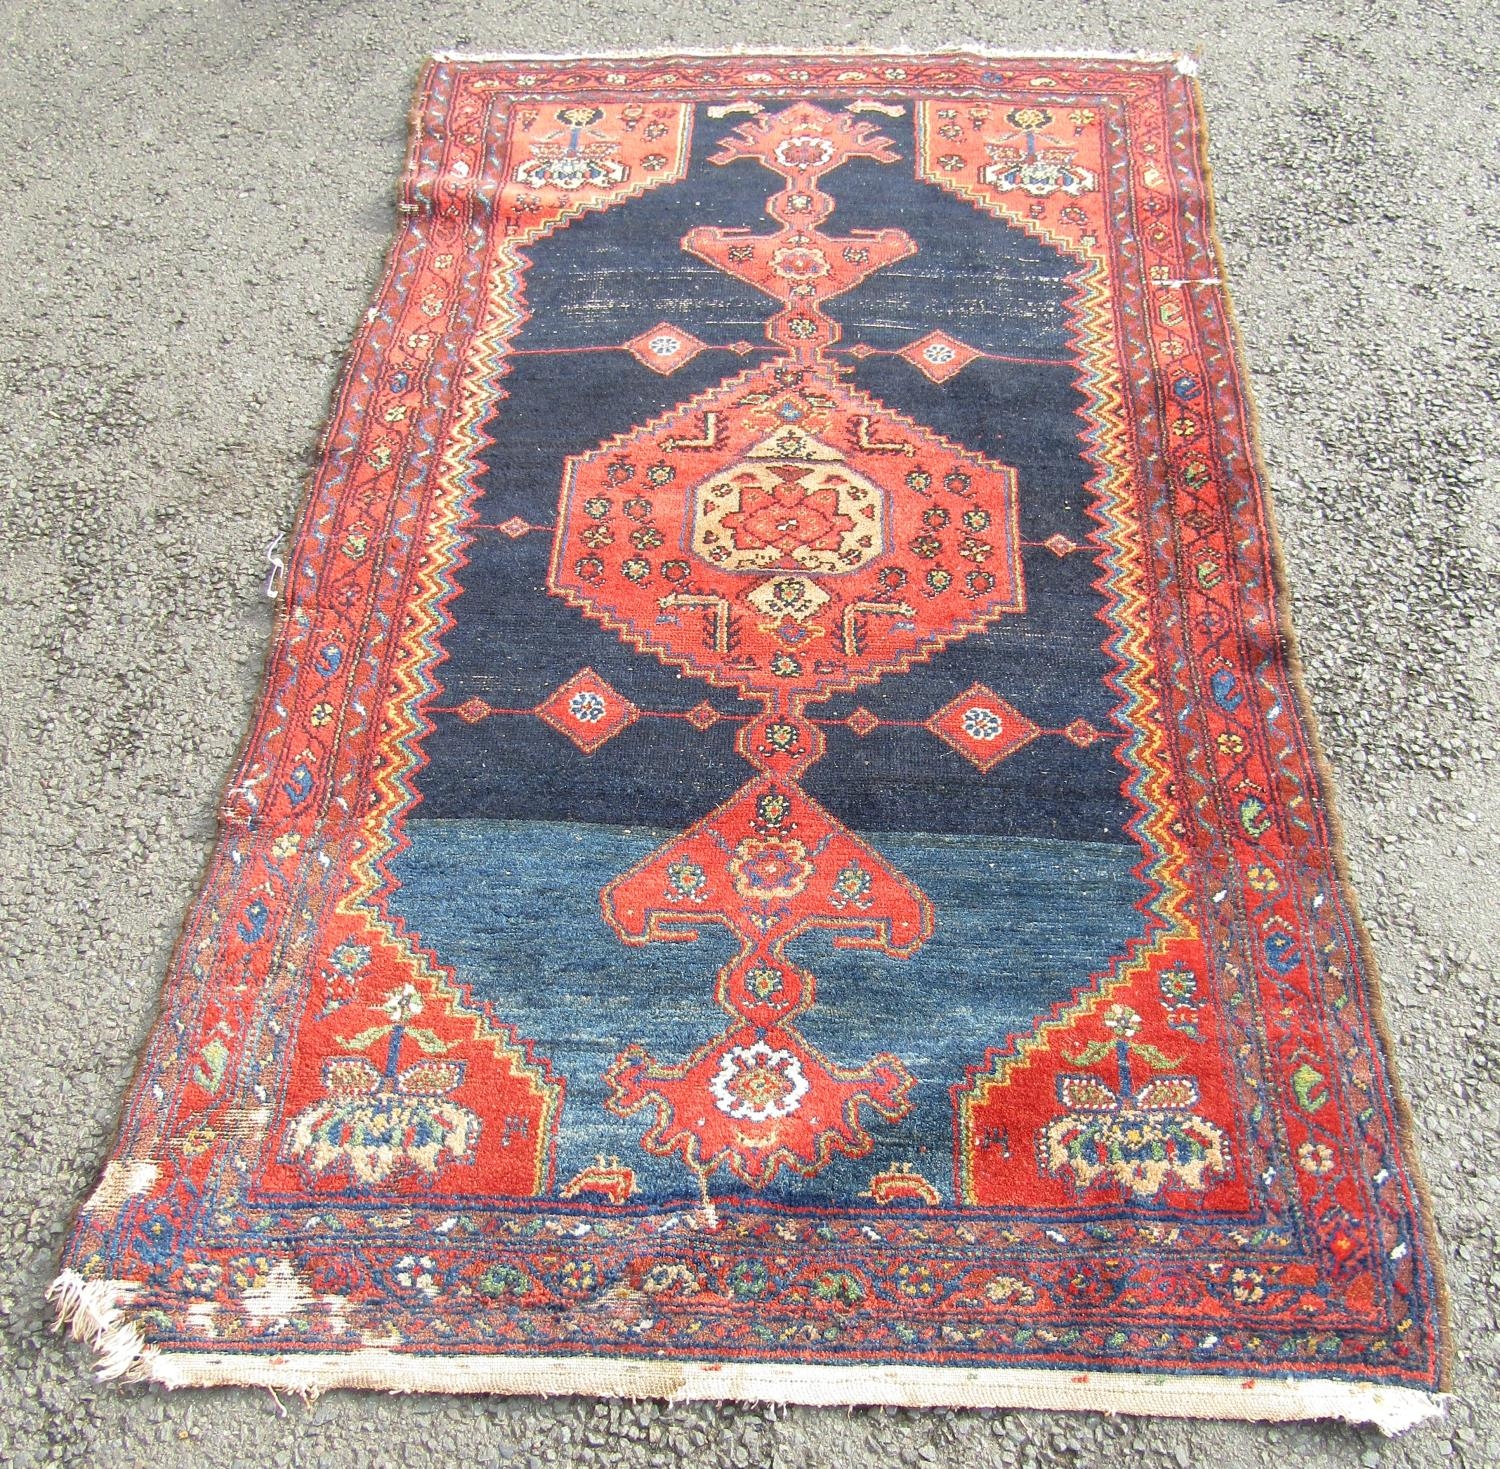 An old Kazak carpet with a central extended medallion and stylised flowers on a dark blue ground,